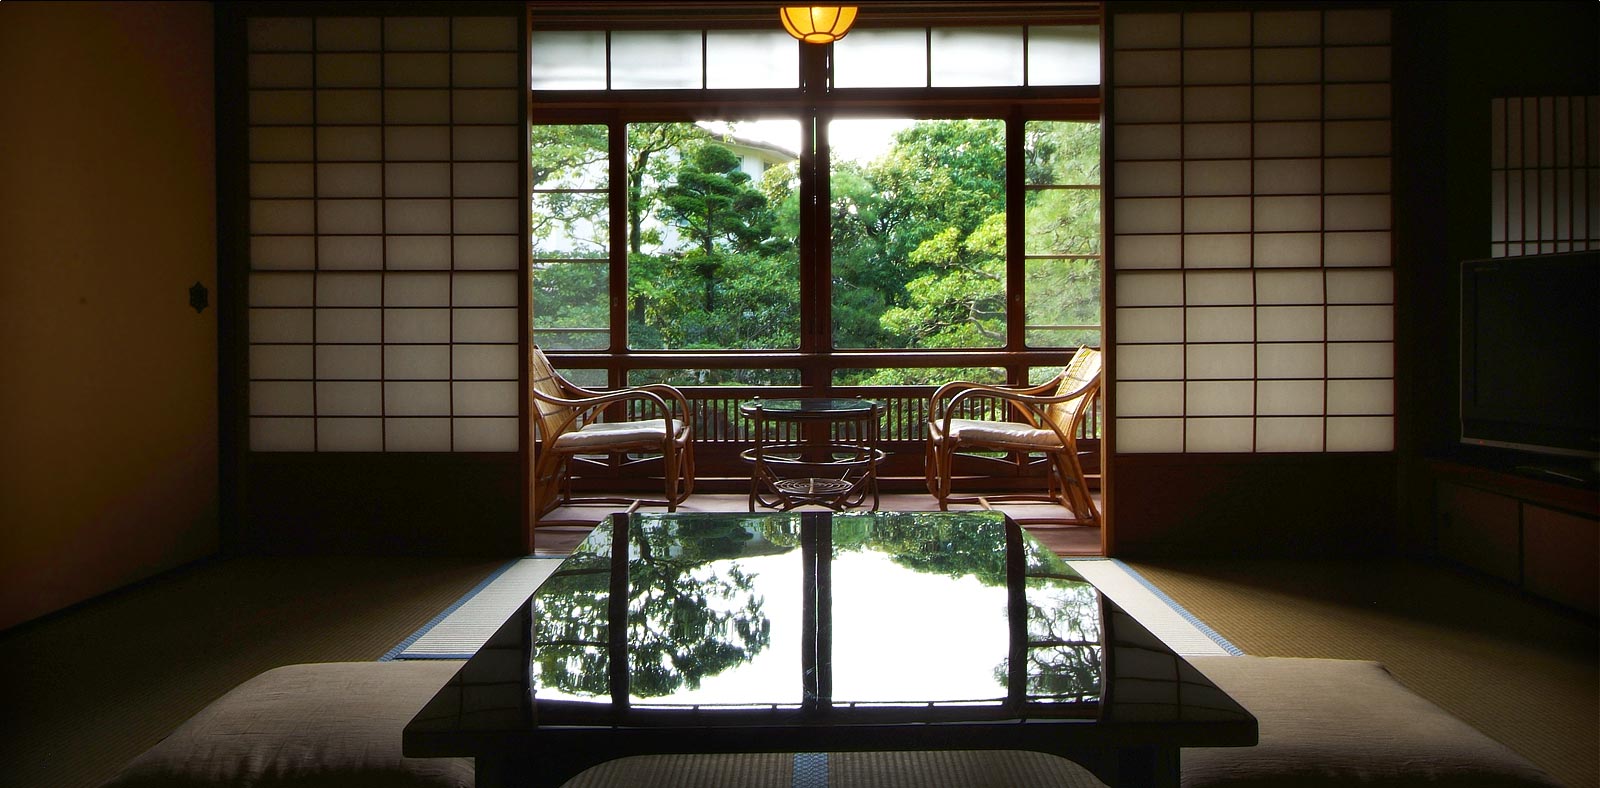 Matsu Suite Room was favored by the late kabuki and film actor Ganjiro Nakamura the second. 